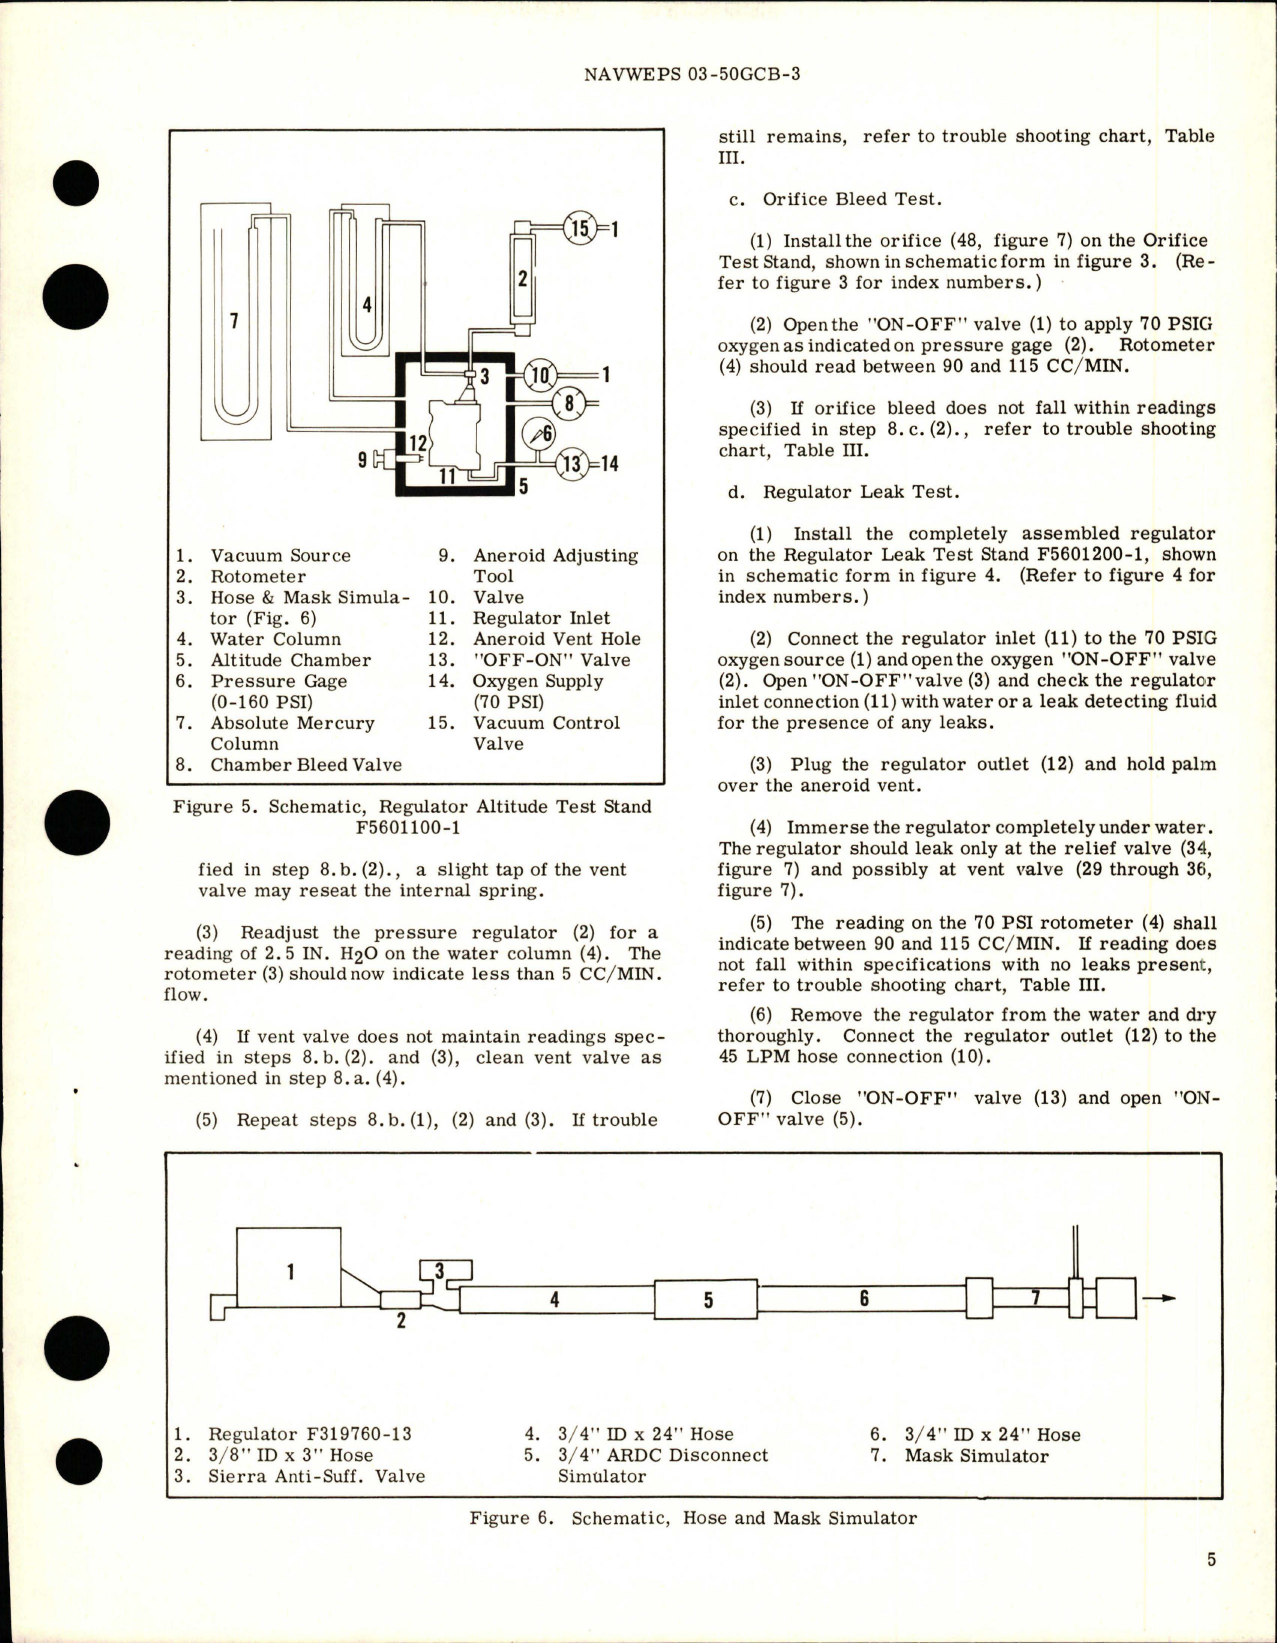 Sample page 7 from AirCorps Library document: Overhaul Instructions with Parts Breakdown for Automatic Pressure Breathing Regulator - Parts F319760-13 and F319760-15